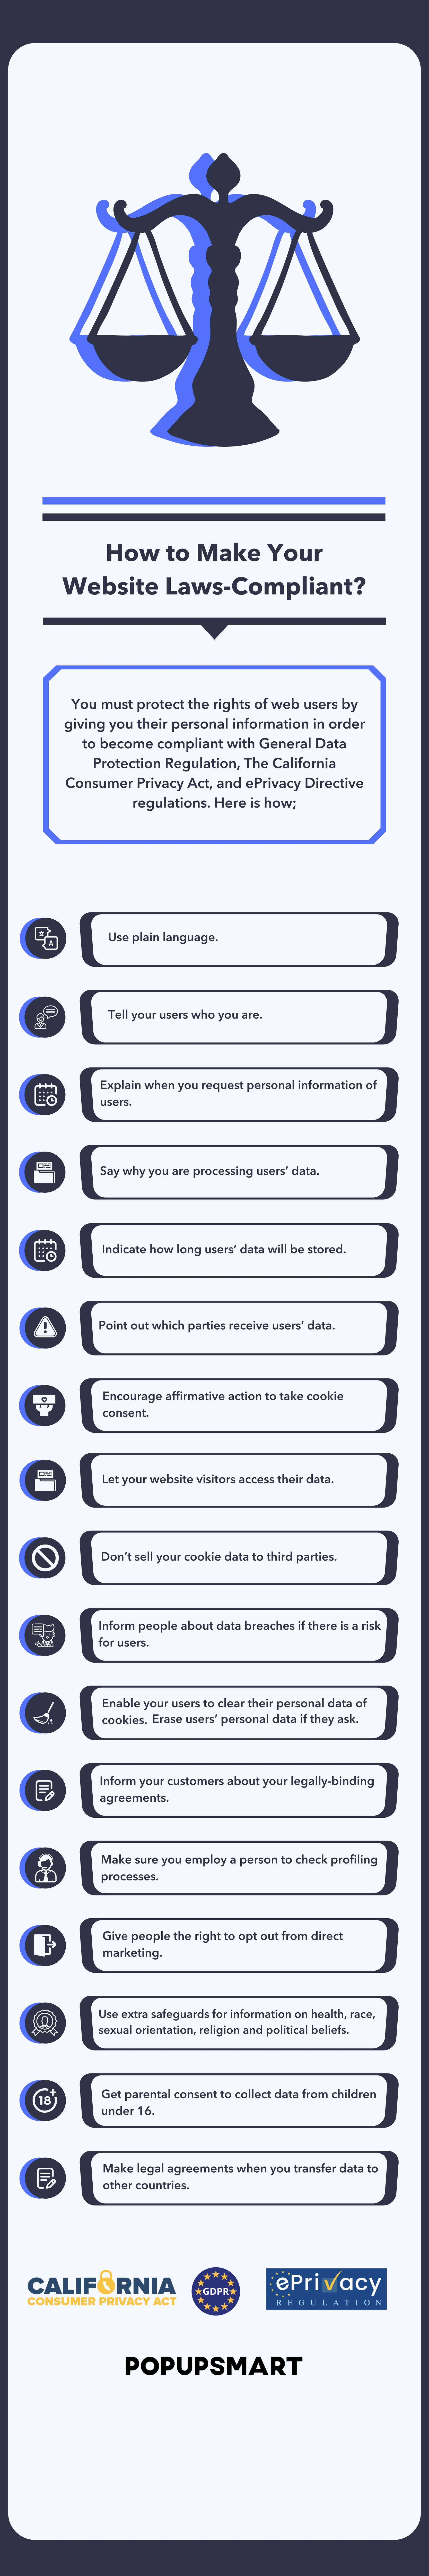 How to make your website cookie laws-compliant explained in an infographic